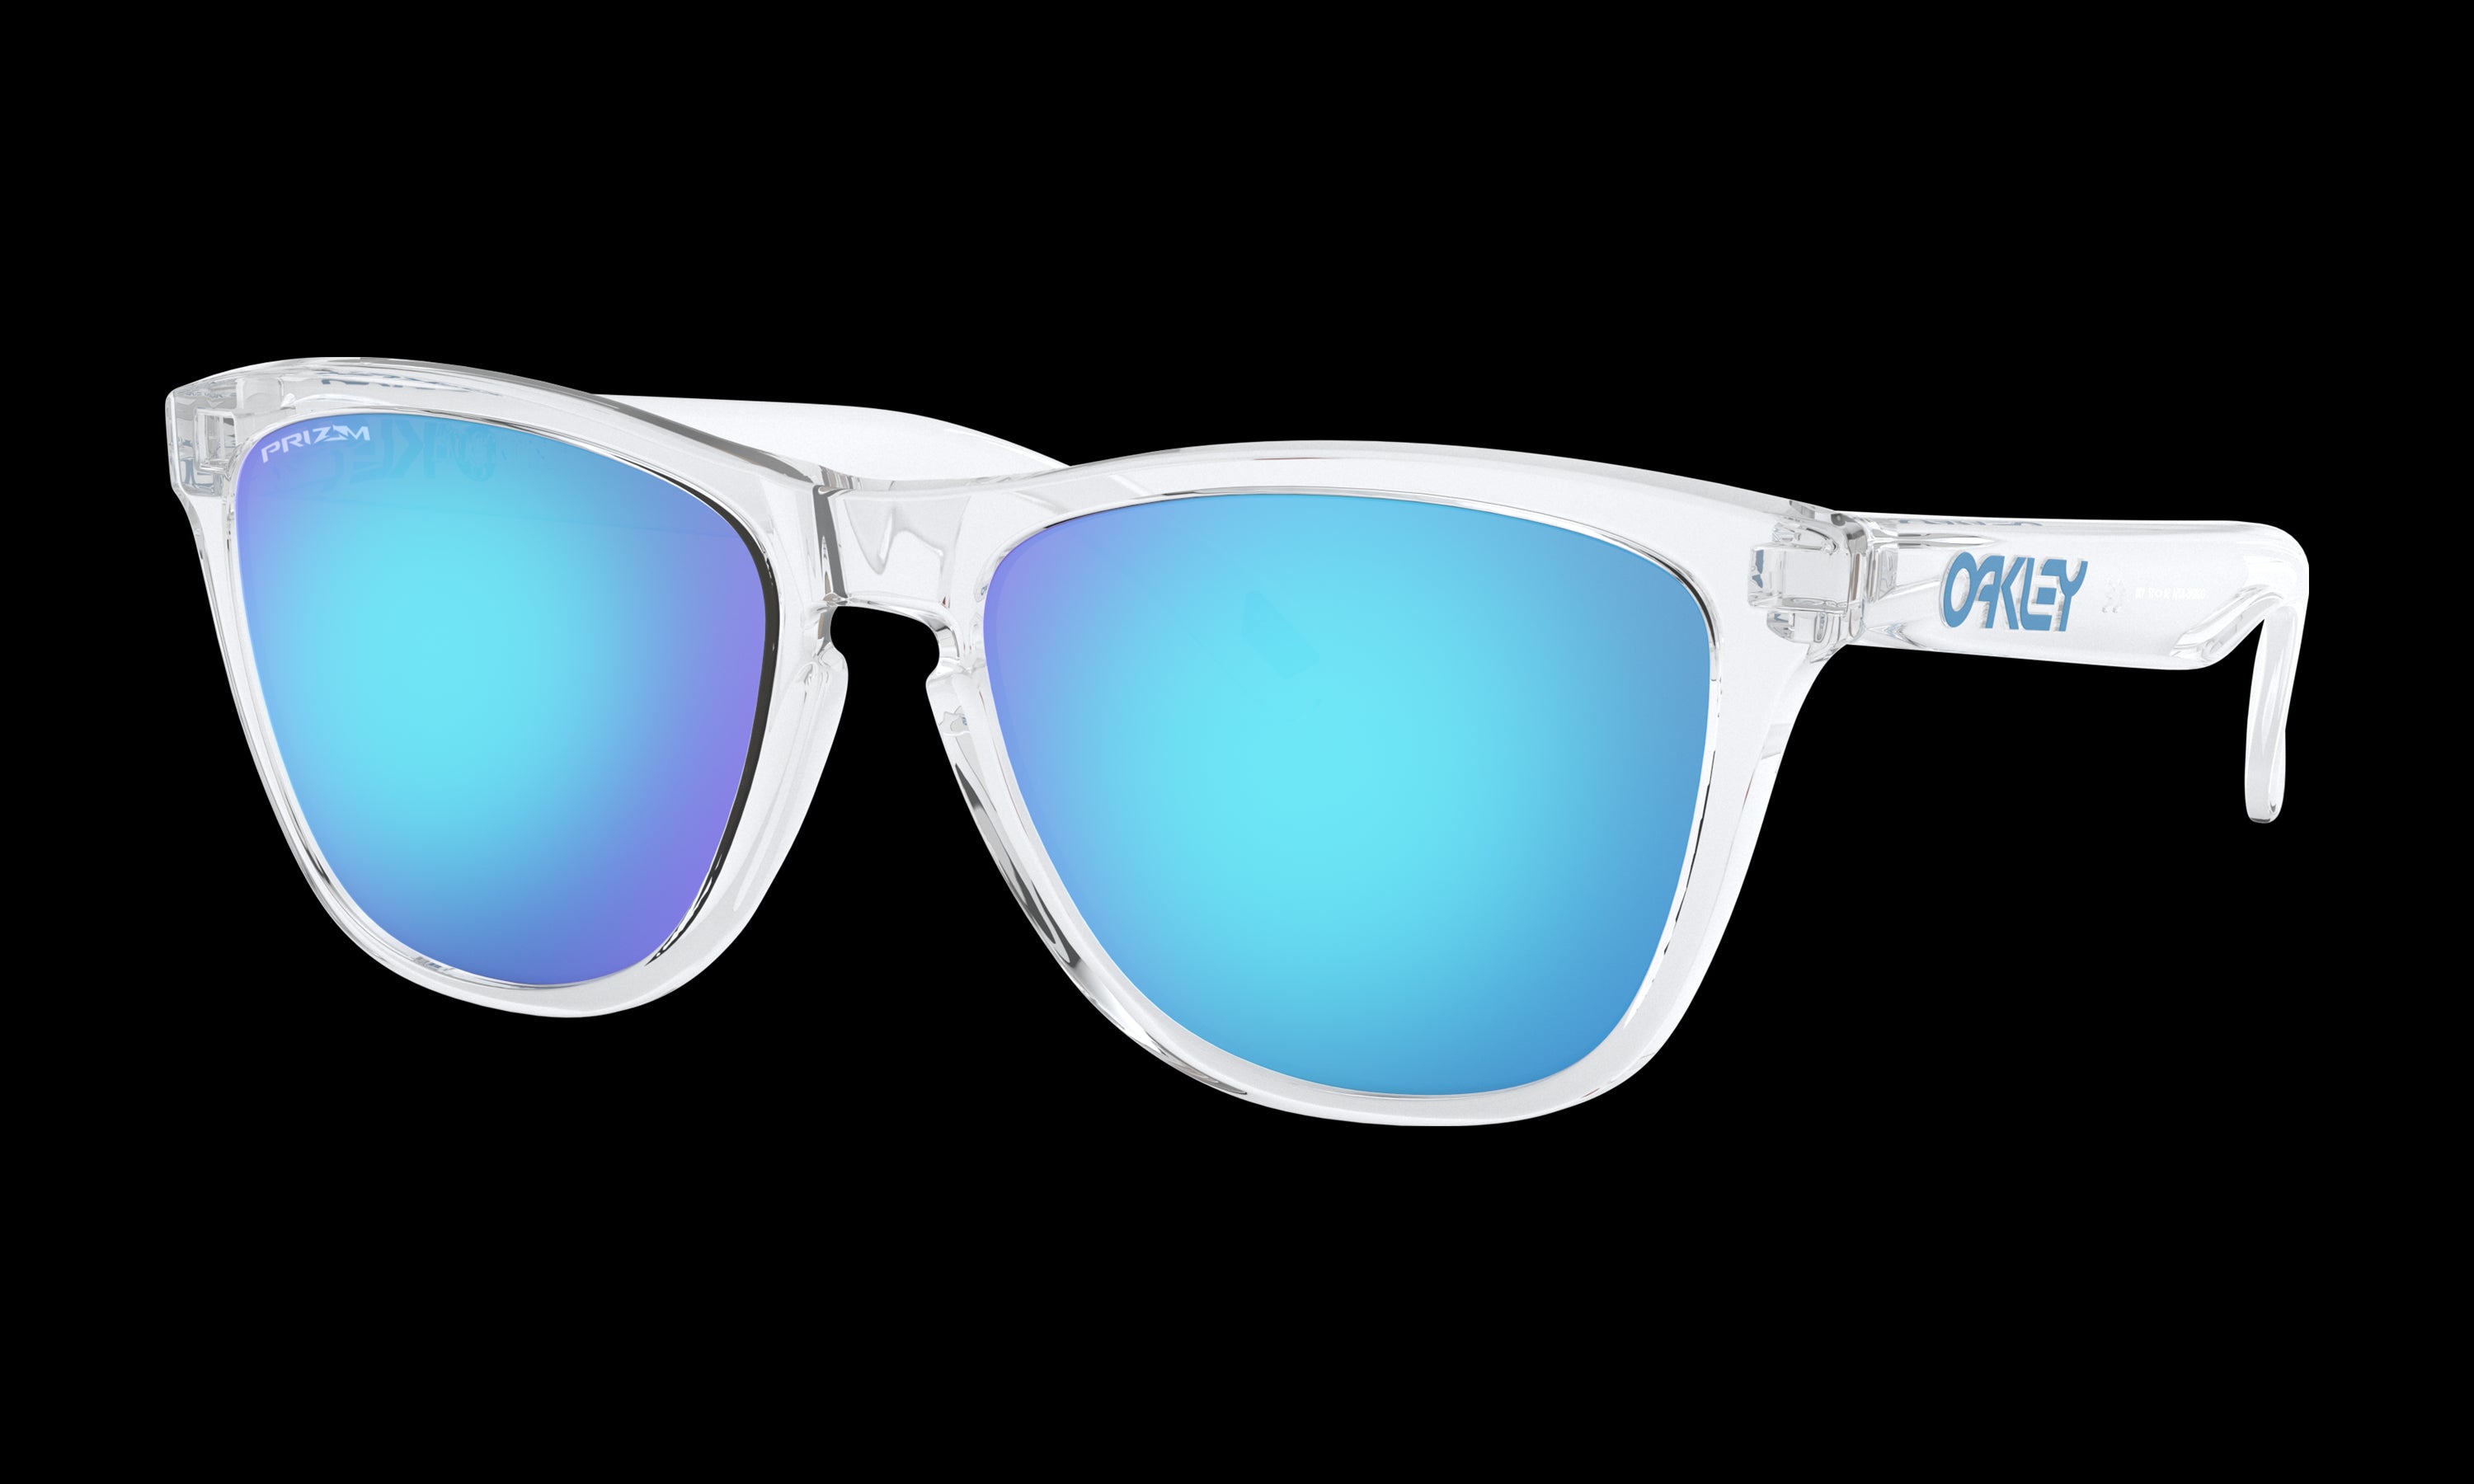 Women's Oakley Frogskins (Asia Fit) Sunglasses in Crystal Clear Prizm Sapphire